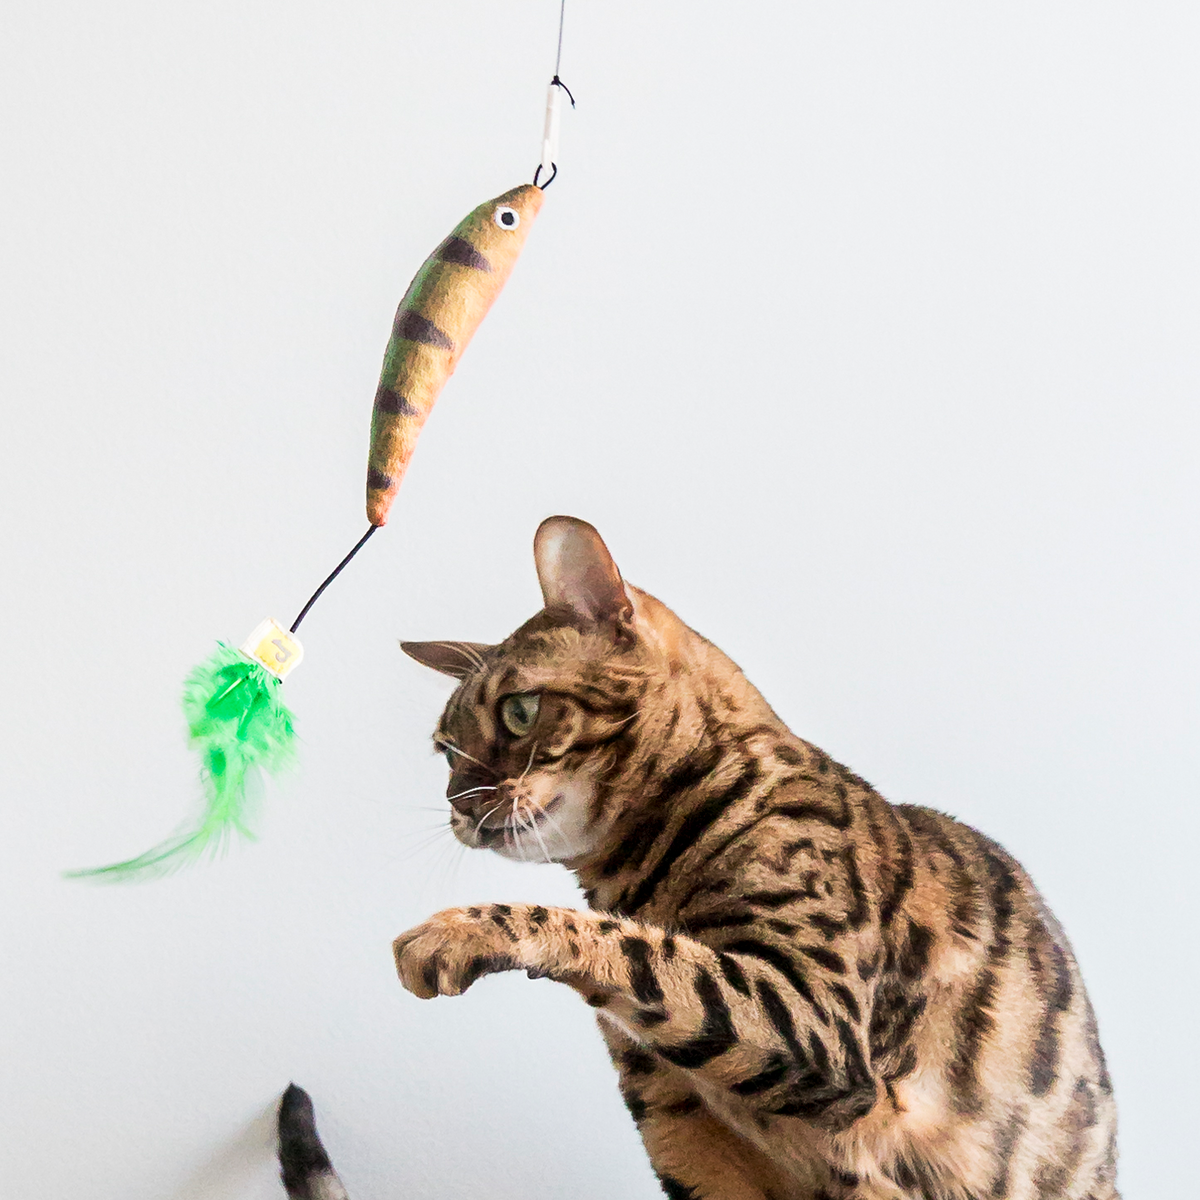 Xwq Cat Stick Toy Resistant to Bite Stress Relief Long Fishing Rod Cat Teaser Toy Pet Supplies, Black